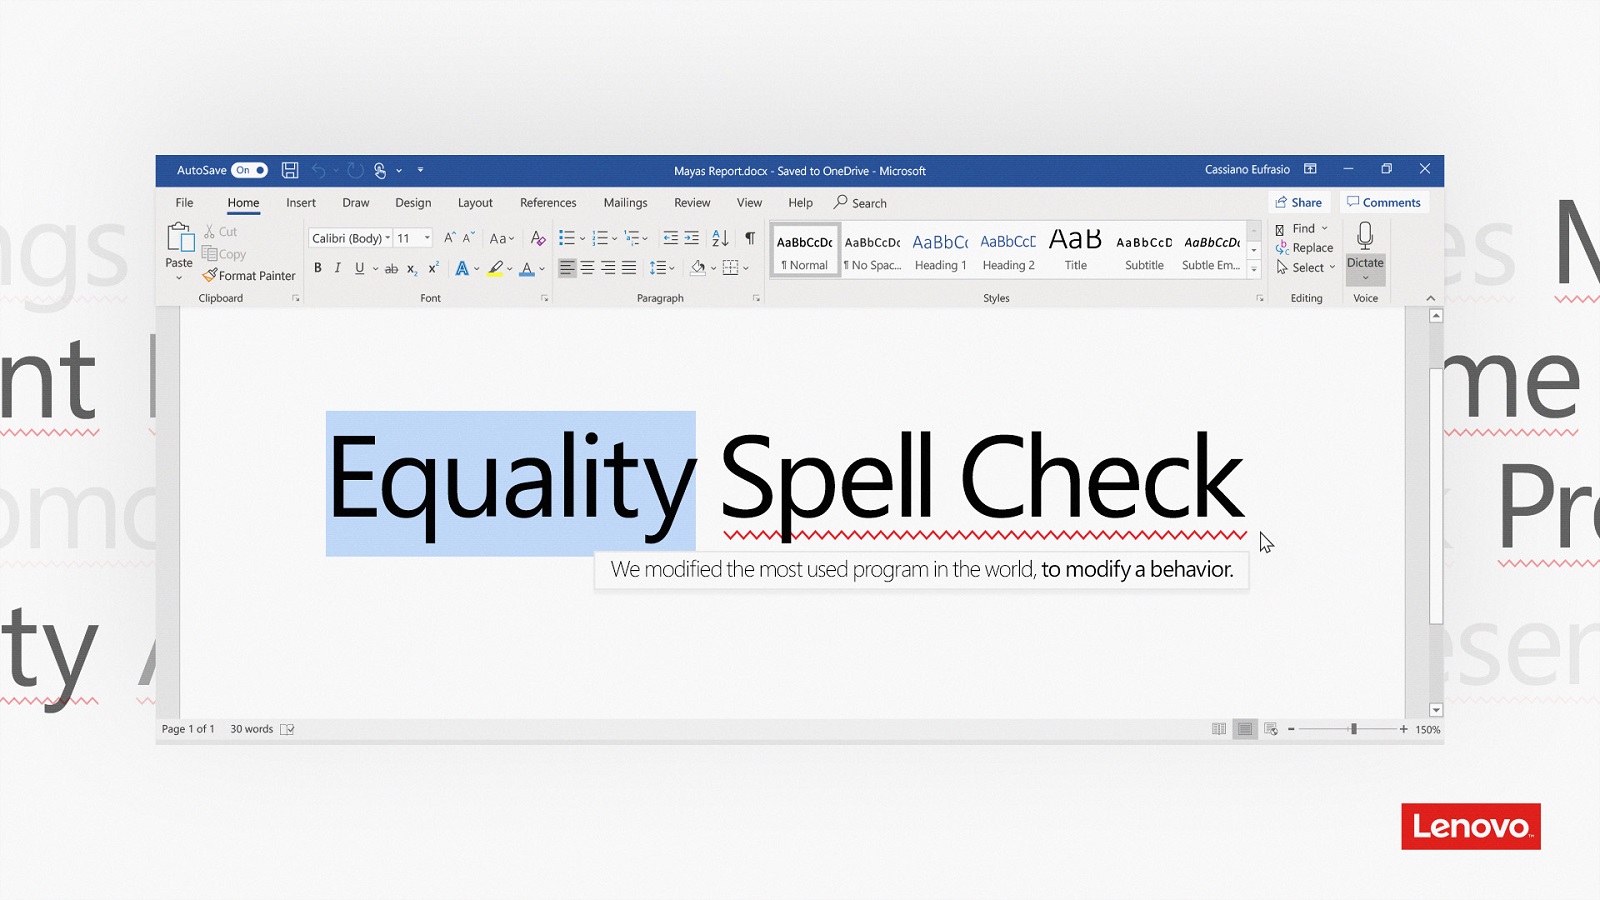 MS Word Plug-In Fights for Gender Equality in the Workplace